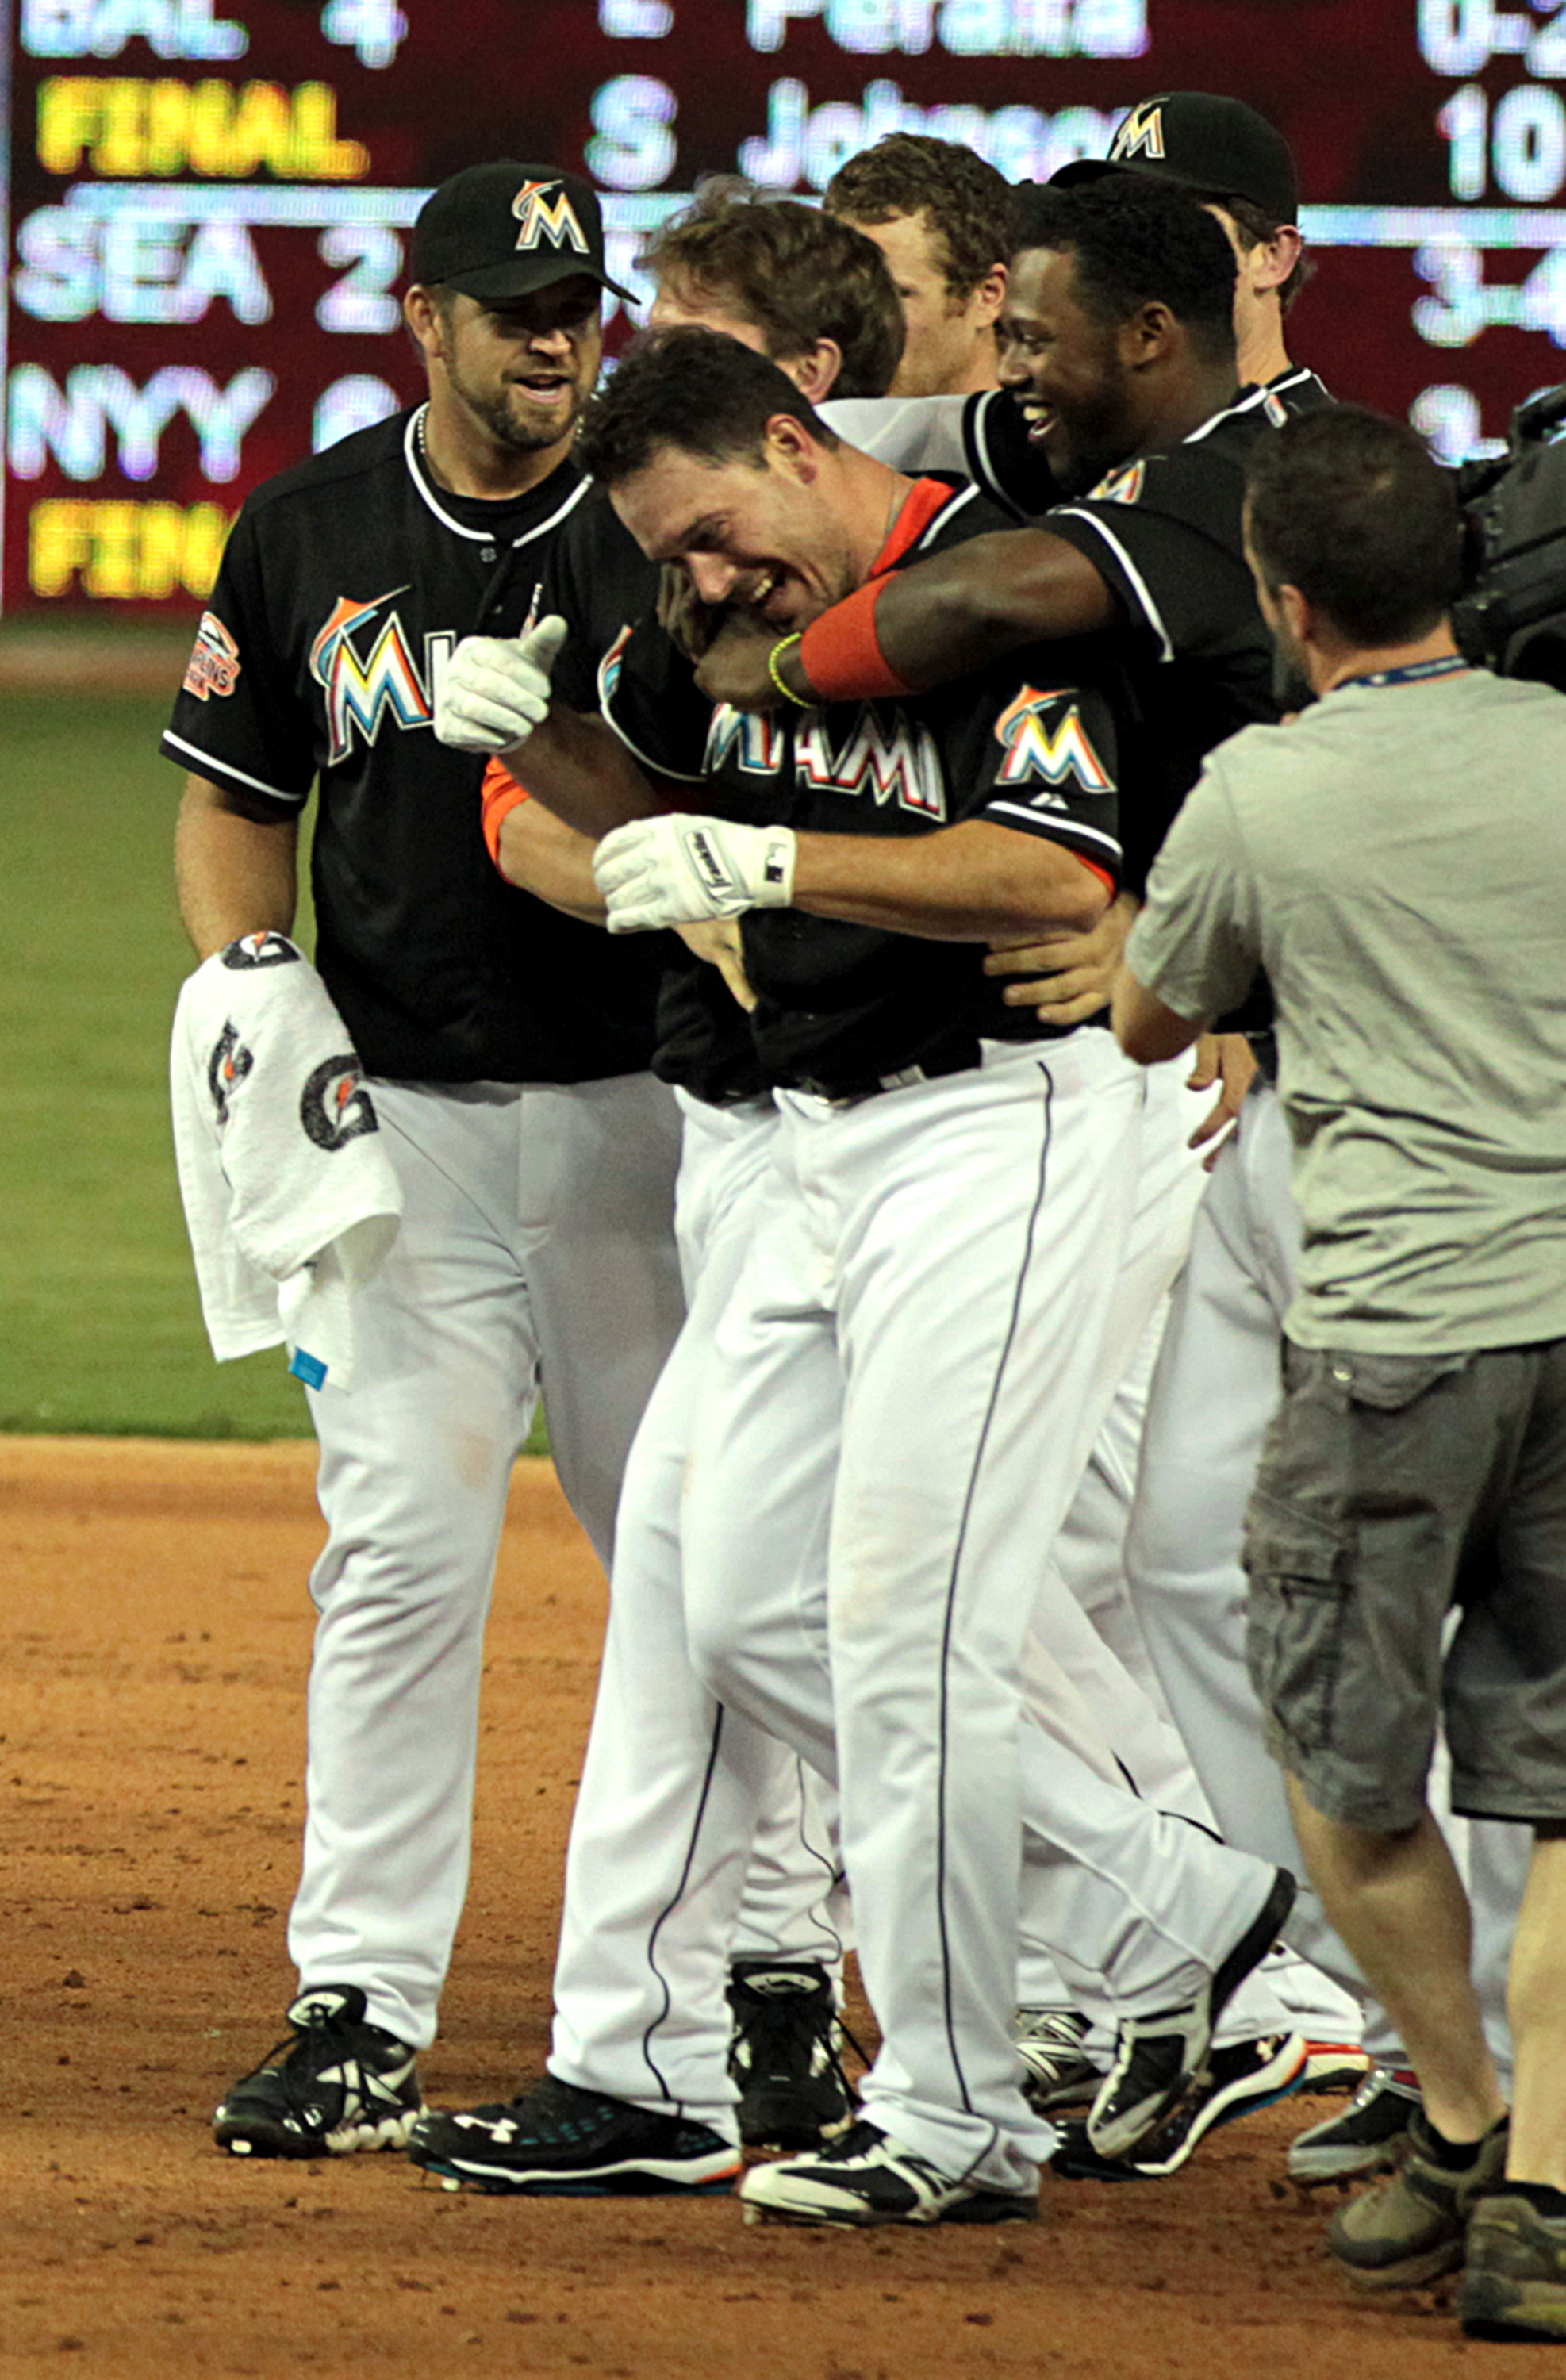 The Miami Marlins’ Hanley Ramirez, hugs teammate Greg Dobbs as they celebrate a 6-5 win against the New York Mets at Marlins Park in Miami, Florida